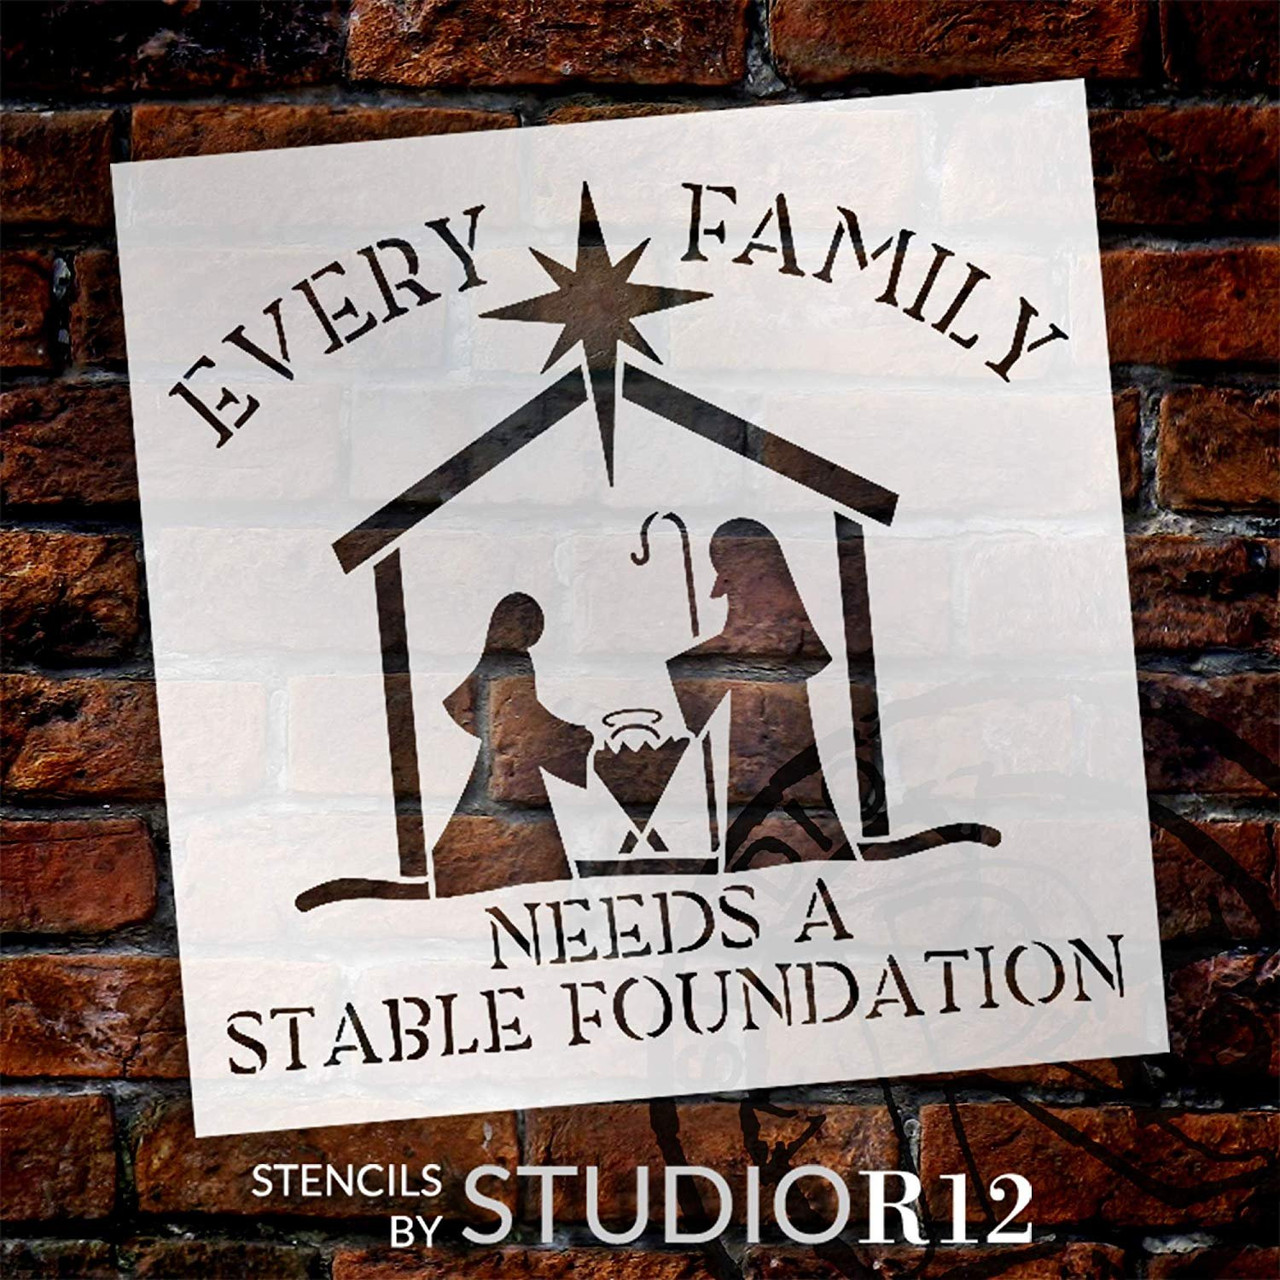 Every Family Needs A Stable Foundation Stencil with Manger StudioR12 | Christian Faith Word Art | DIY Christmas Holiday Home Decor | Paint Wood Signs | Reusable Mylar | Select Size